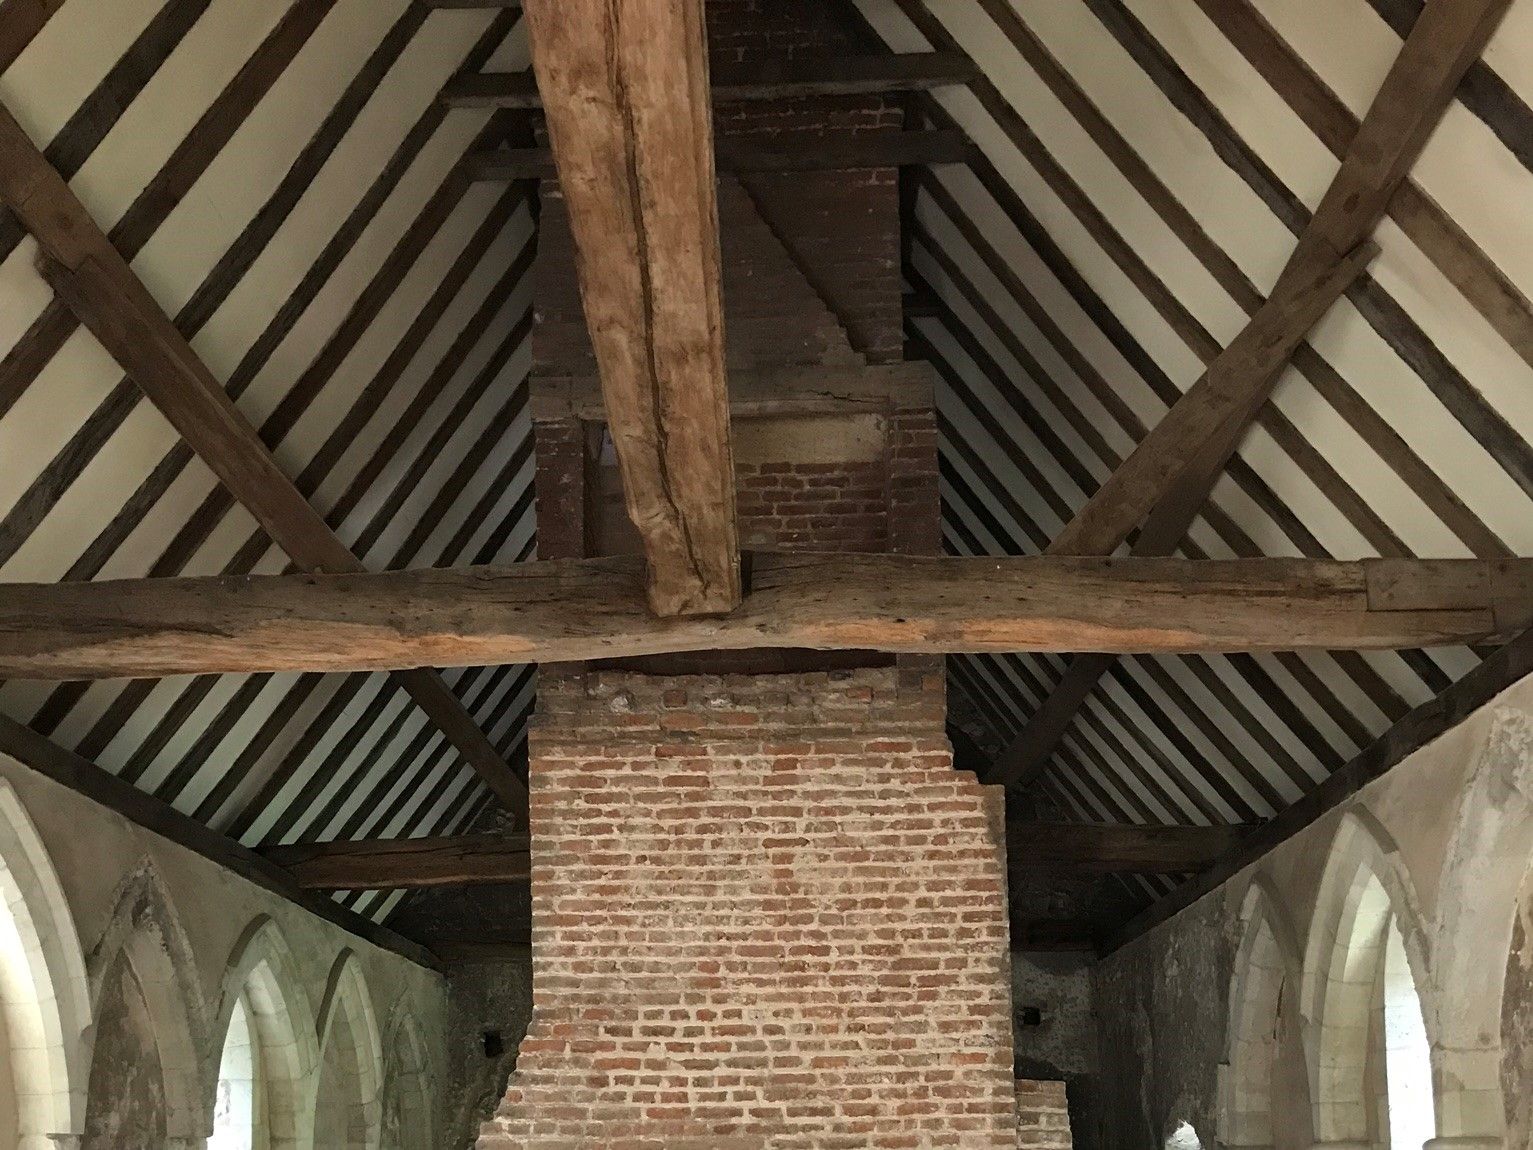 The top of the chimney breast in the 13th century hall at Temple Manor.